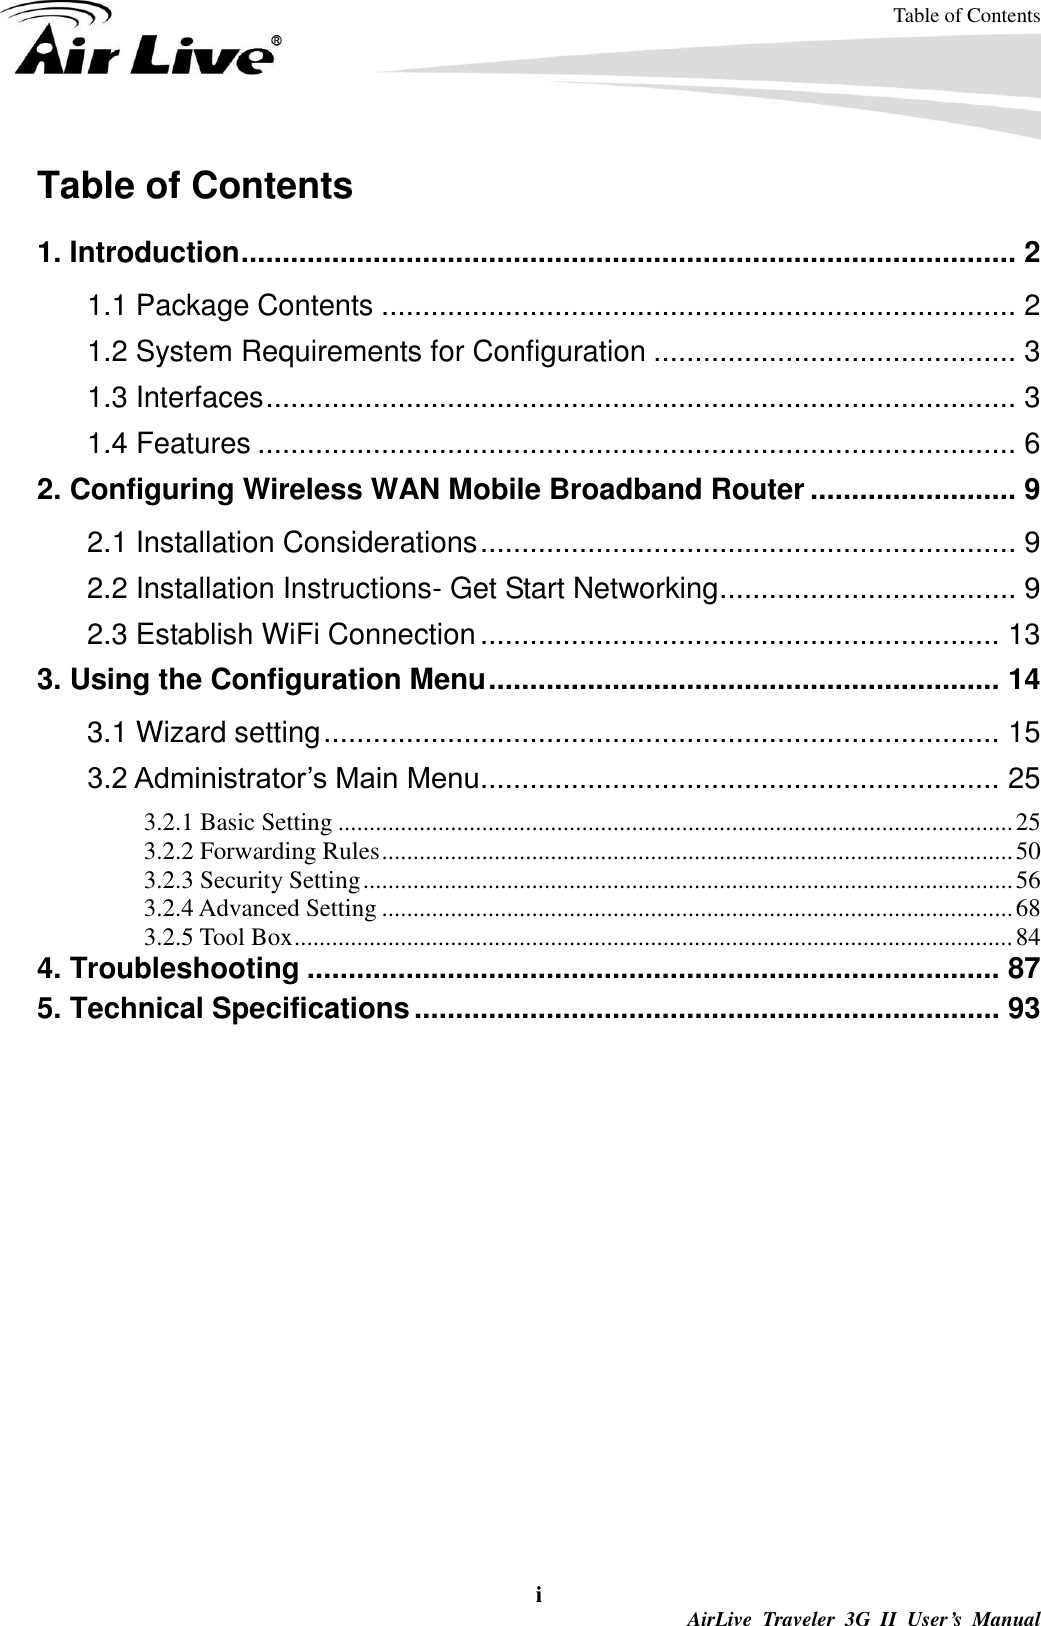 Table of Contents i  AirLive  Traveler  3G  II  User’s  Manual Table of Contents  1. Introduction .............................................................................................. 2 1.1 Package Contents ............................................................................. 2 1.2 System Requirements for Configuration ............................................ 3 1.3 Interfaces ........................................................................................... 3 1.4 Features ............................................................................................ 6 2. Configuring Wireless WAN Mobile Broadband Router ......................... 9 2.1 Installation Considerations ................................................................. 9 2.2 Installation Instructions- Get Start Networking .................................... 9 2.3 Establish WiFi Connection ............................................................... 13 3. Using the Configuration Menu .............................................................. 14 3.1 Wizard setting .................................................................................. 15 3.2 Administrator’s Main Menu ............................................................... 25 3.2.1 Basic Setting ............................................................................................................ 25 3.2.2 Forwarding Rules ..................................................................................................... 50 3.2.3 Security Setting ........................................................................................................ 56 3.2.4 Advanced Setting ..................................................................................................... 68 3.2.5 Tool Box ................................................................................................................... 84 4. Troubleshooting .................................................................................... 87 5. Technical Specifications ....................................................................... 93  